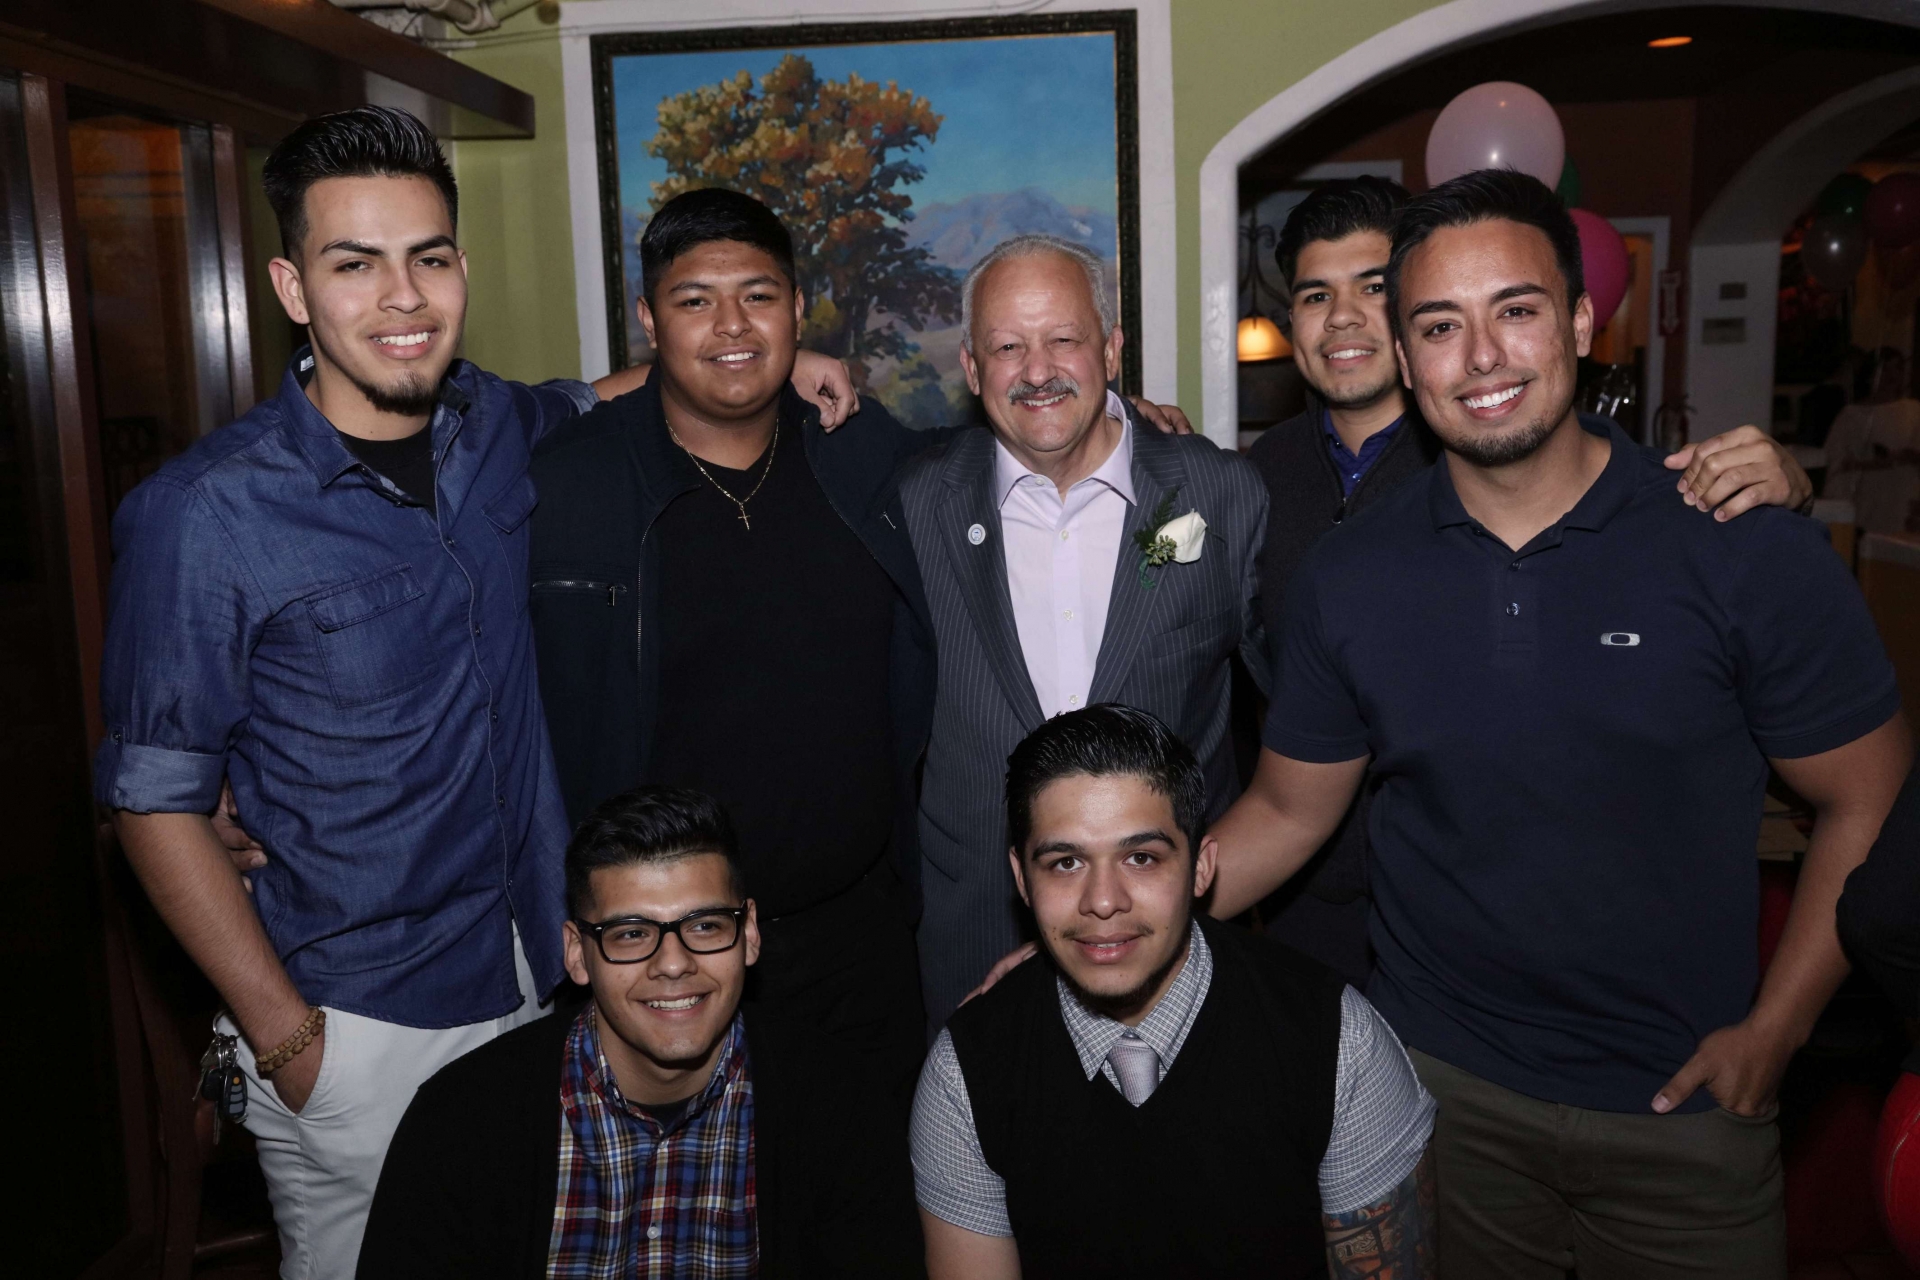 Students with the CSUSB president